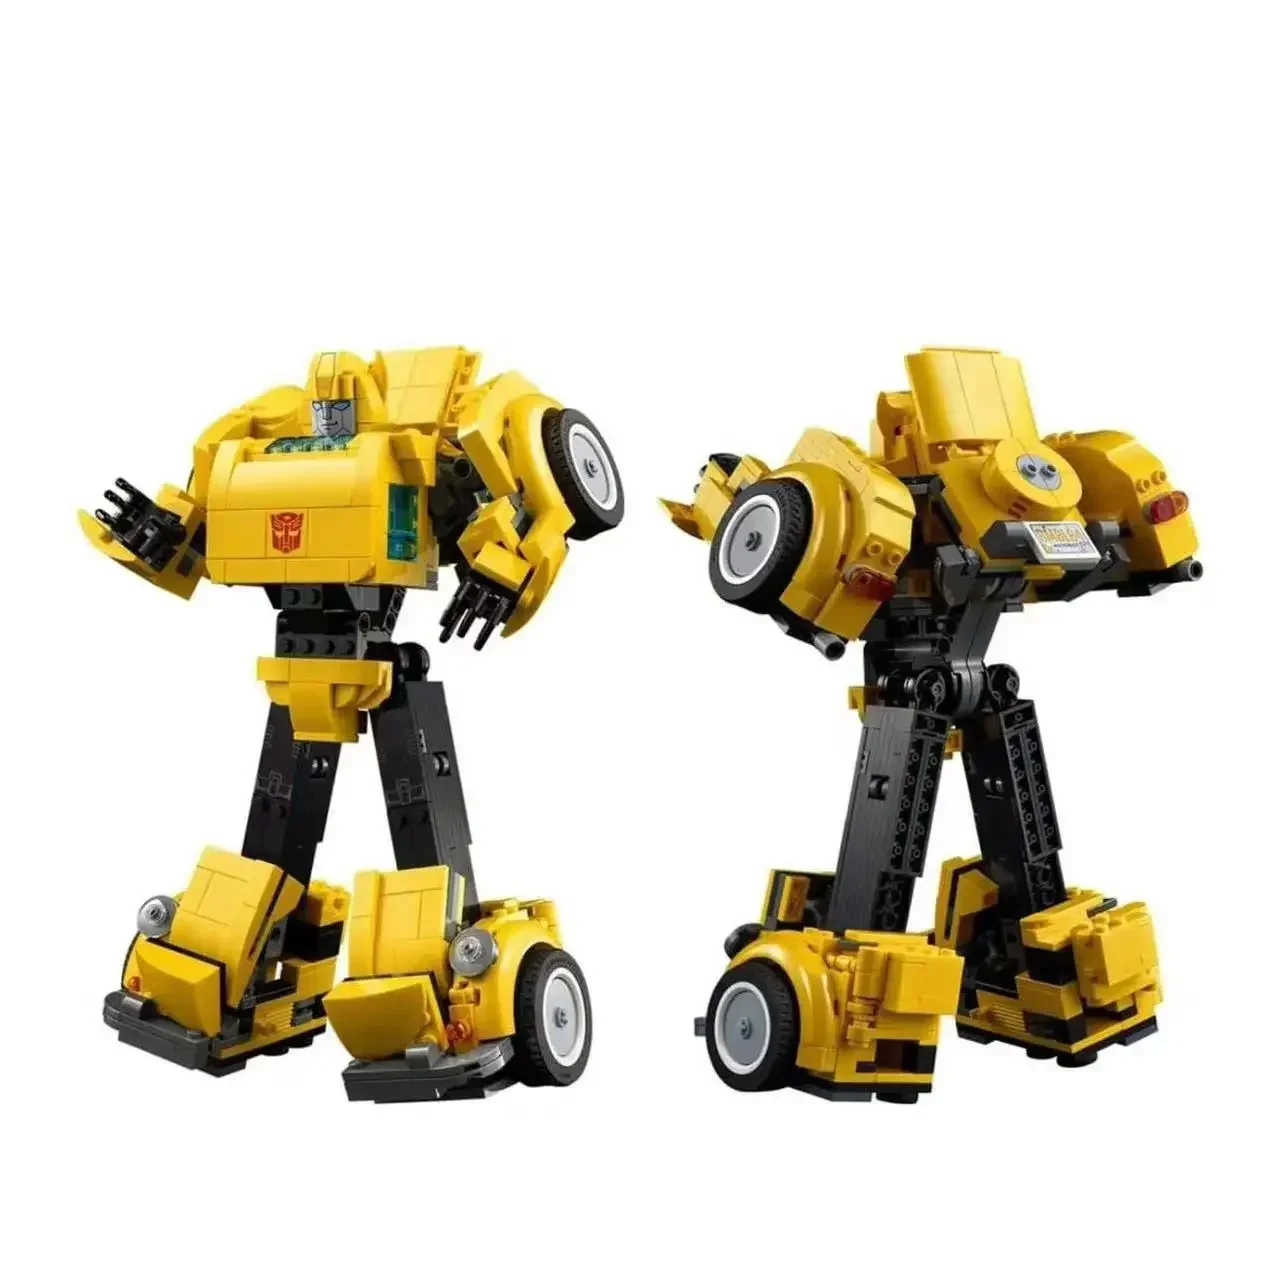 

950Pcs Yellow Robot Truck Car Toys Building Blocks 10338 Truck Transformationed Autobot Deformation Gift For Children